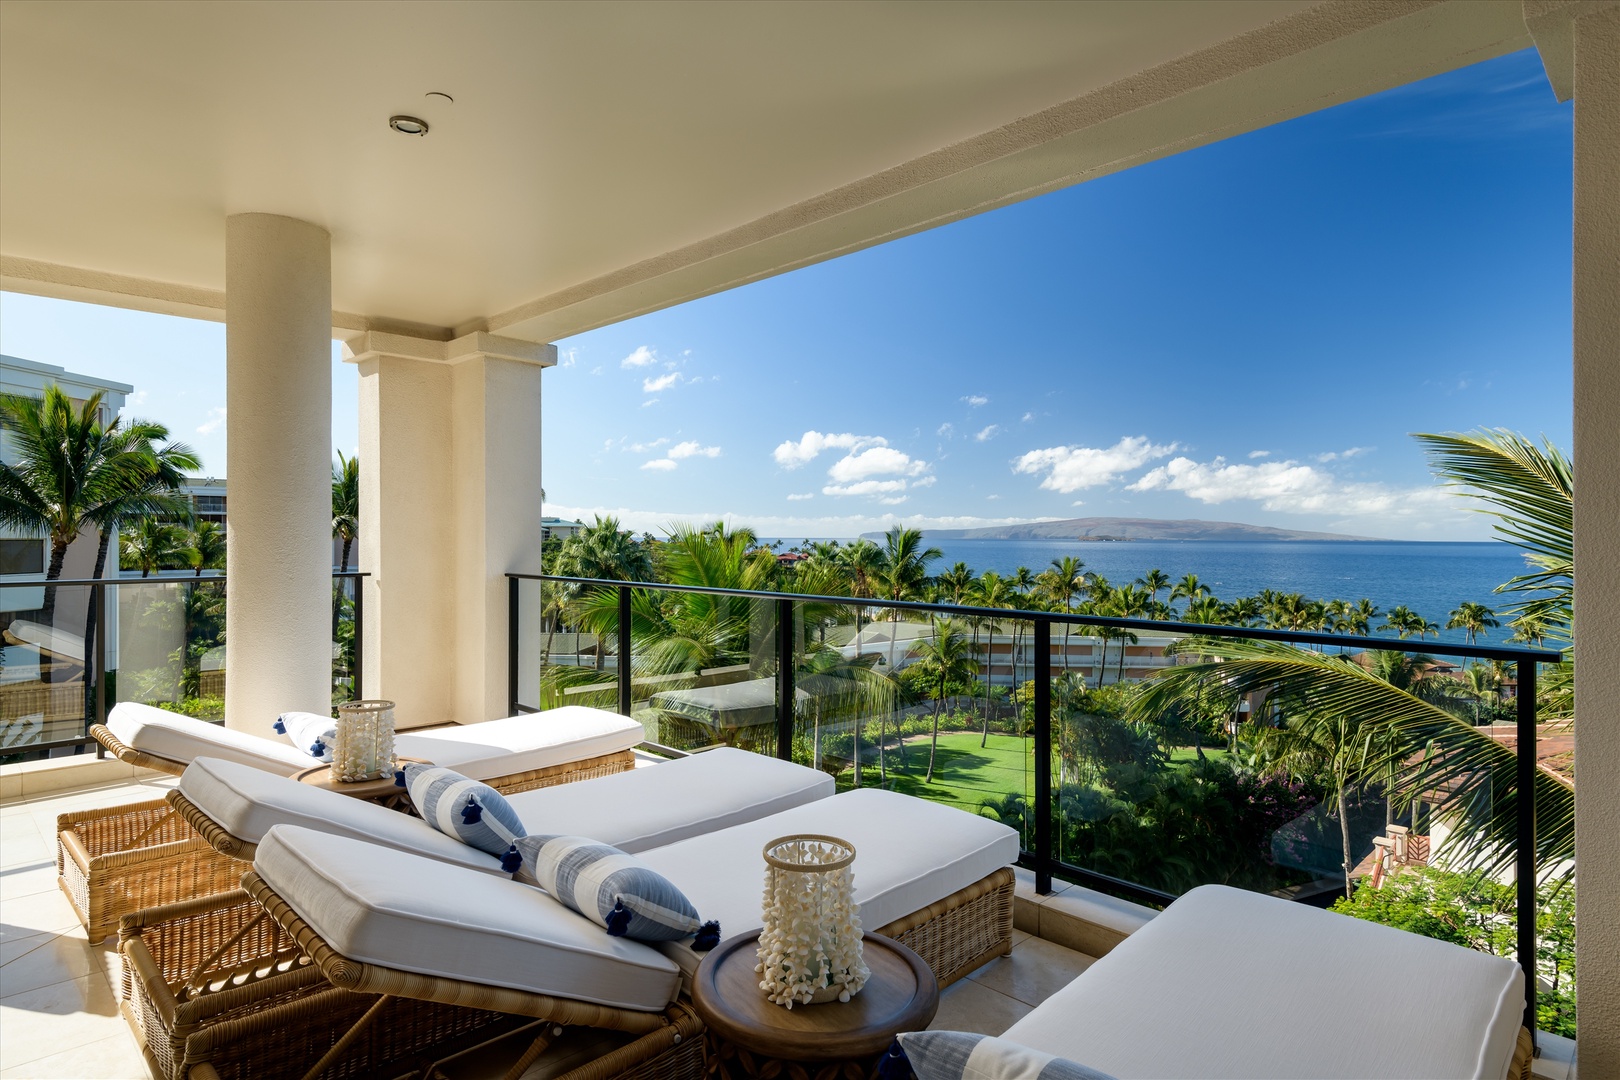 Wailea Vacation Rentals, Blue Ocean Suite H401 at Wailea Beach Villas* - Amazing Panoramic Ocean and Neighboring Island Views from Blue Ocean Suite H401 Covered Lanai